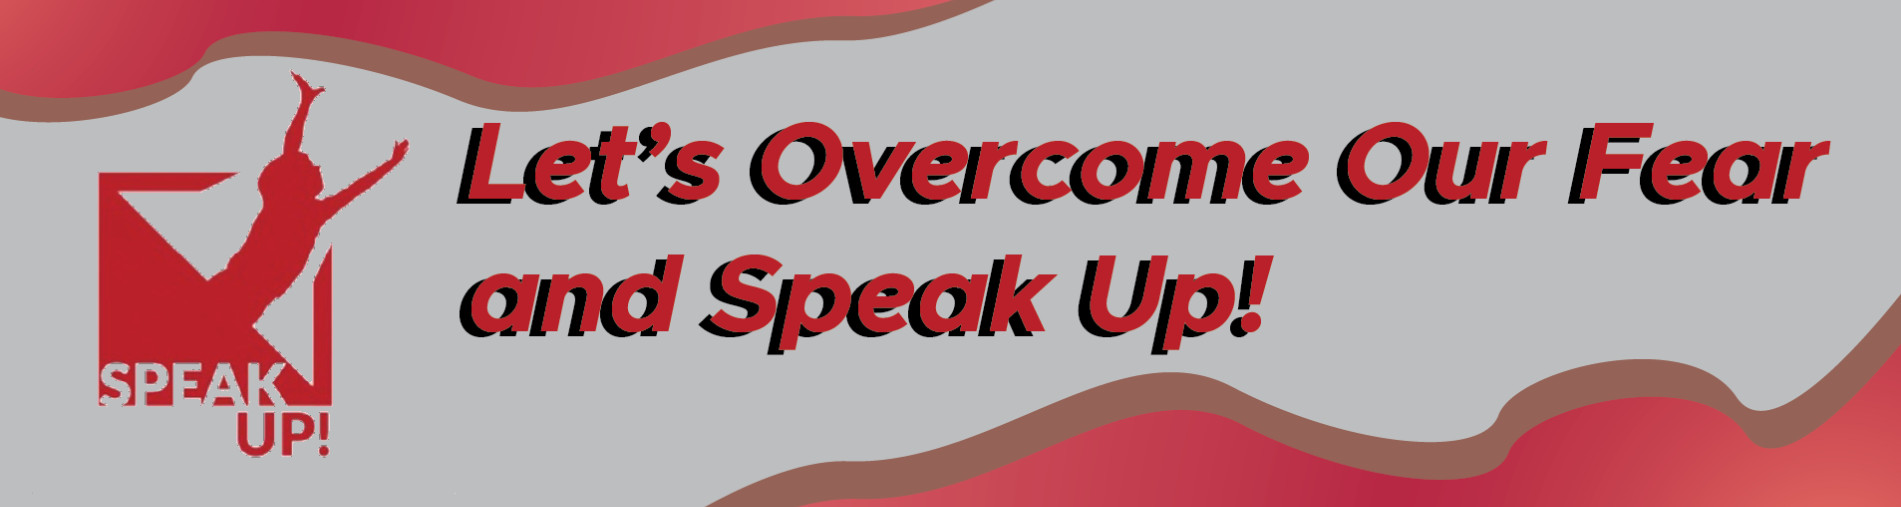 Let’s Overcome Our Fear and Speak Up!